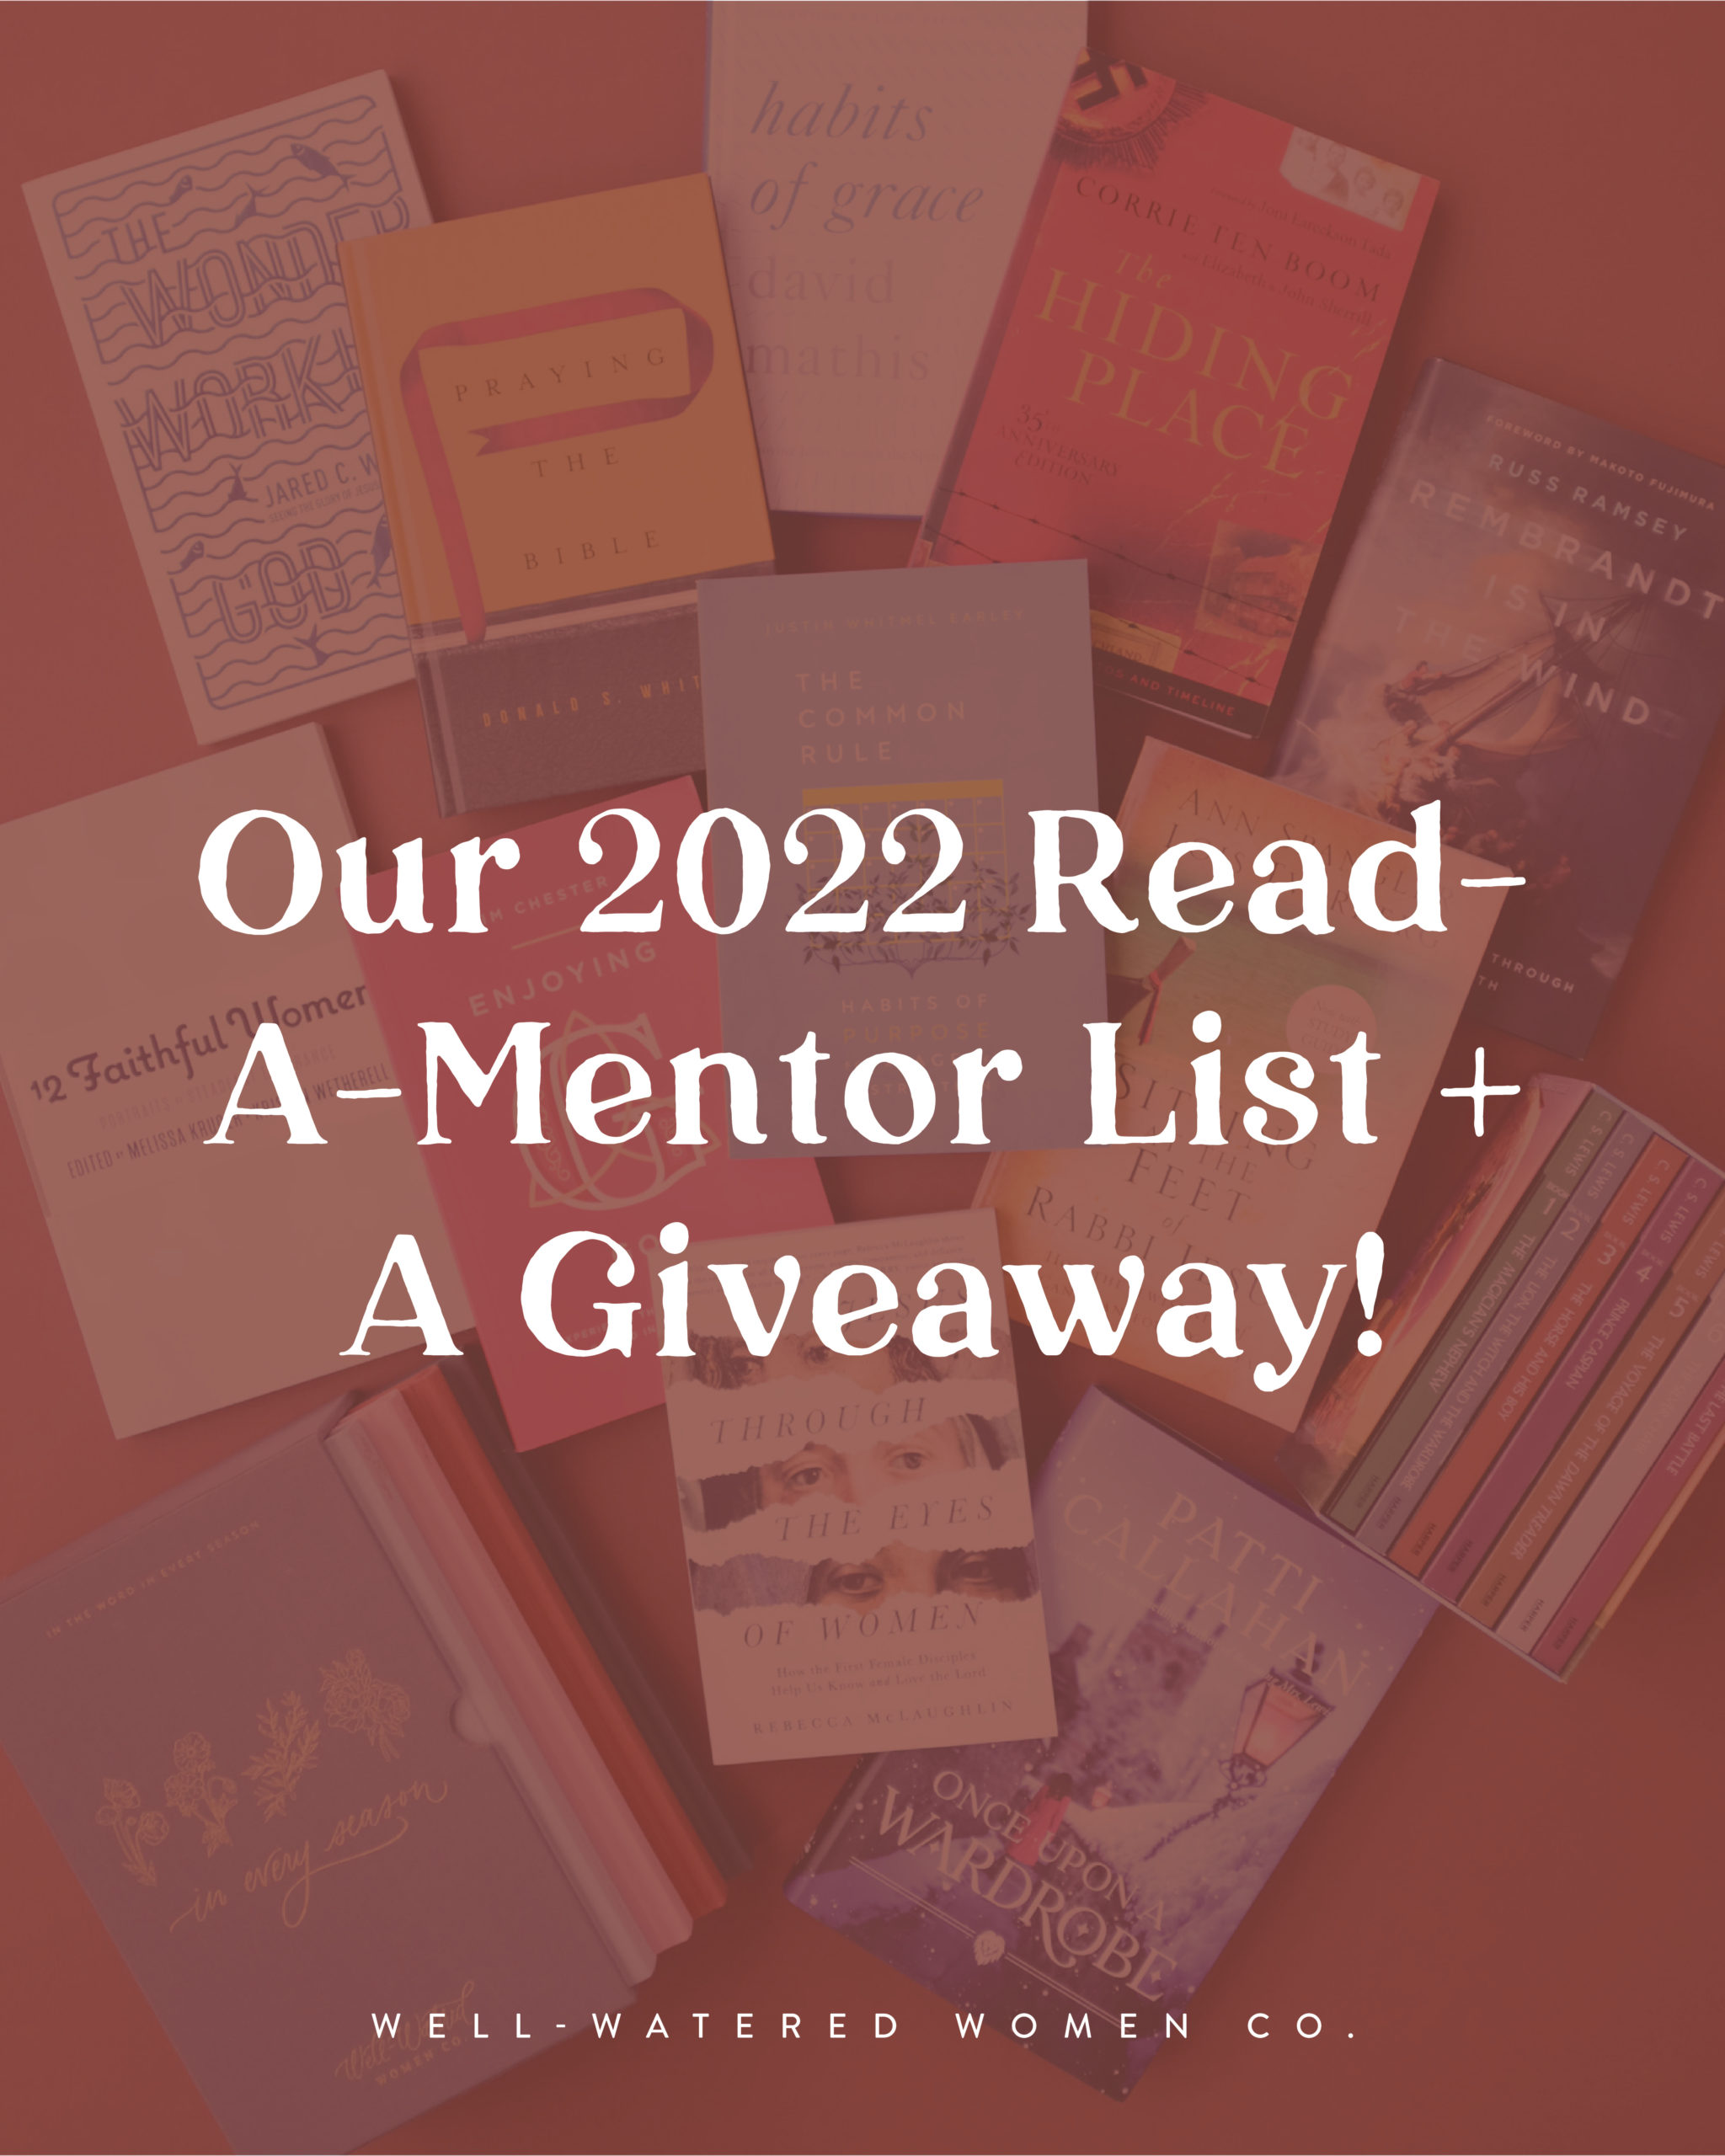 Our 2022 Read-A-Mentor List + A Giveaway! - an article from Well-Watered Women